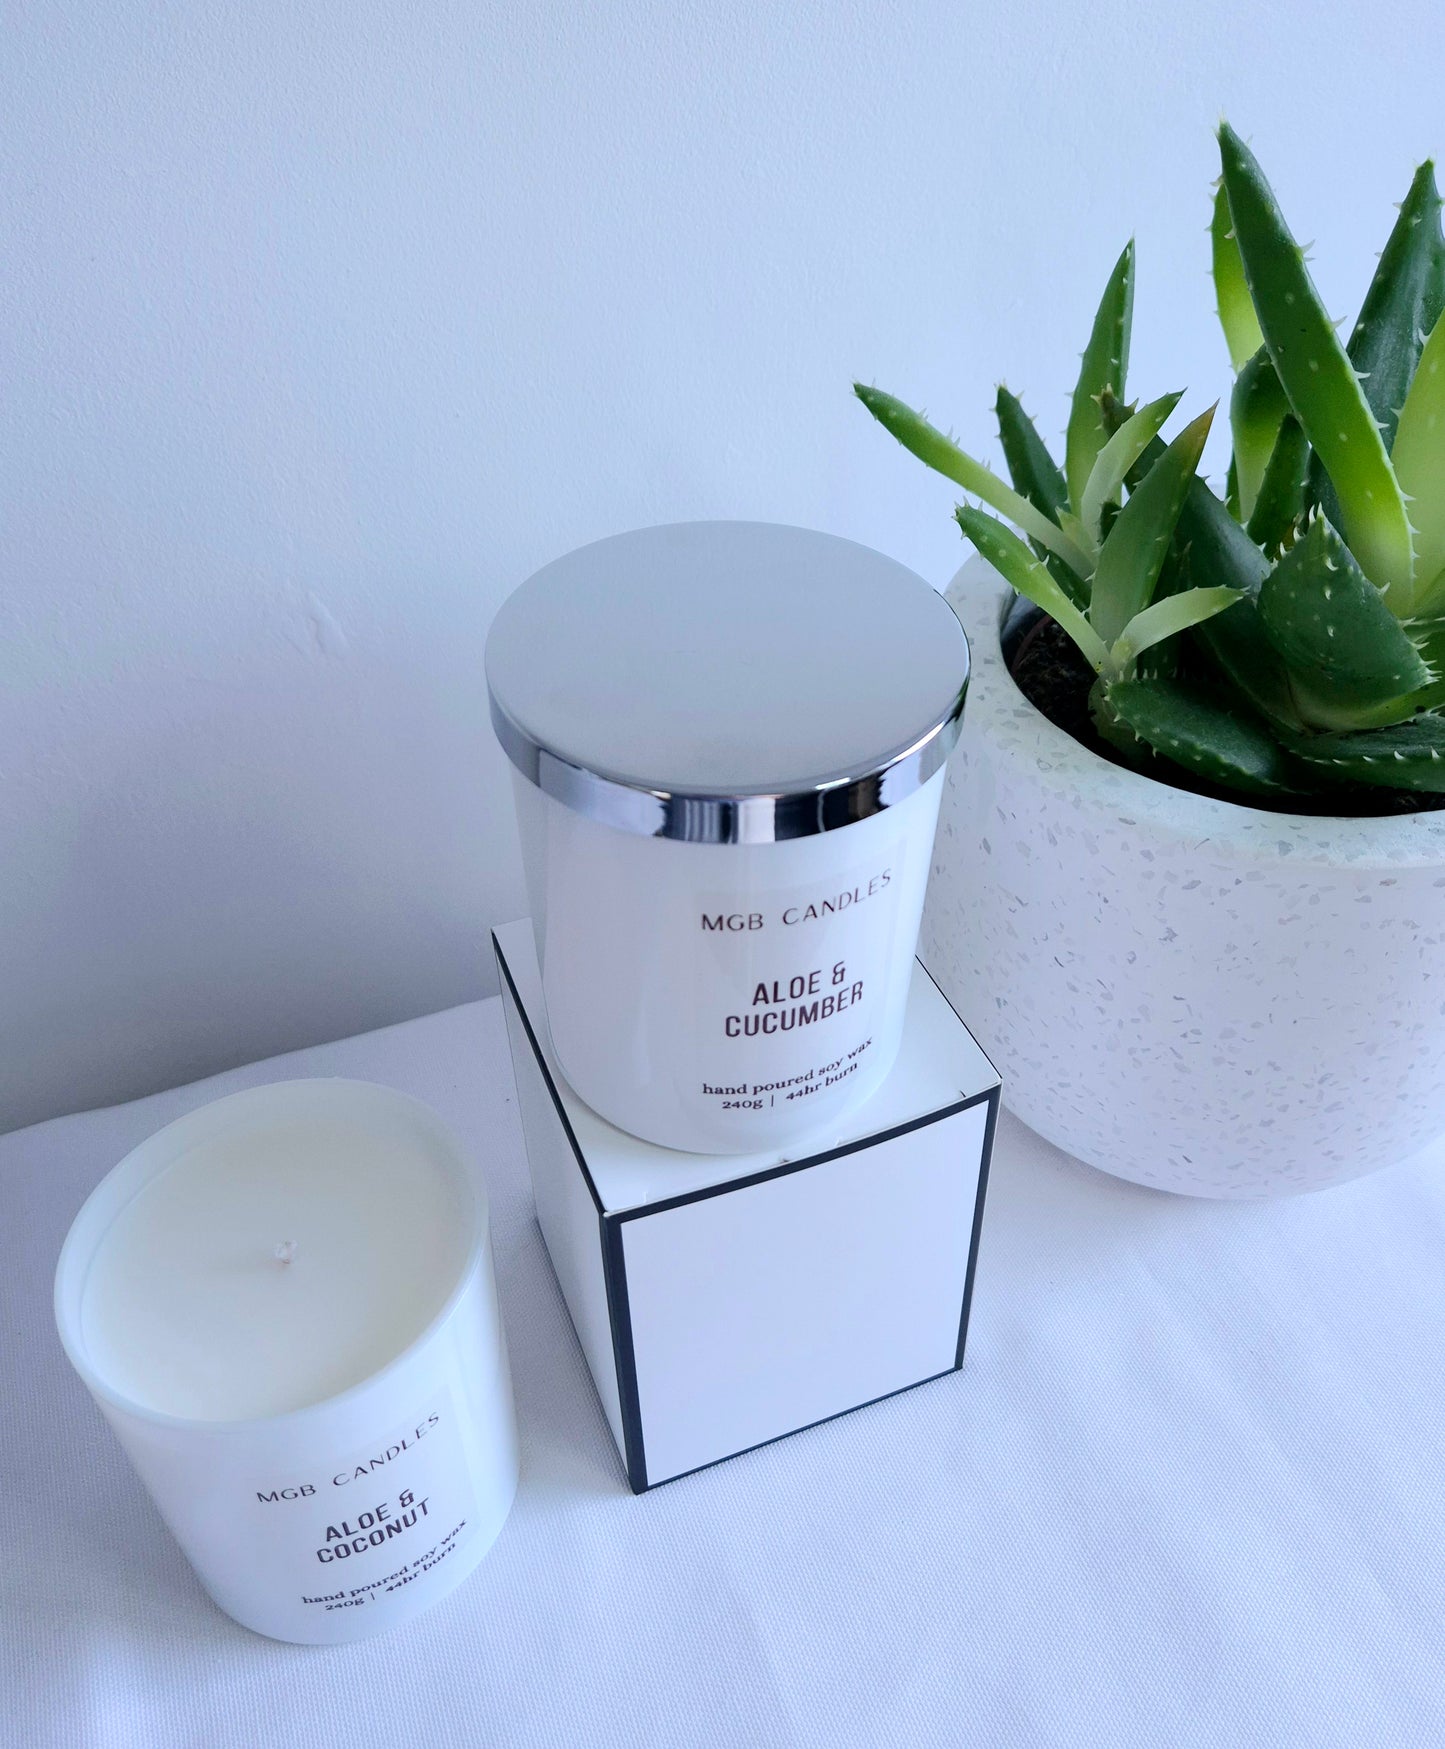 ALOE & COCONUT, White Gloss and Pearl Mica Wax Candle. Hand Poured Soy Wax, 260ml.